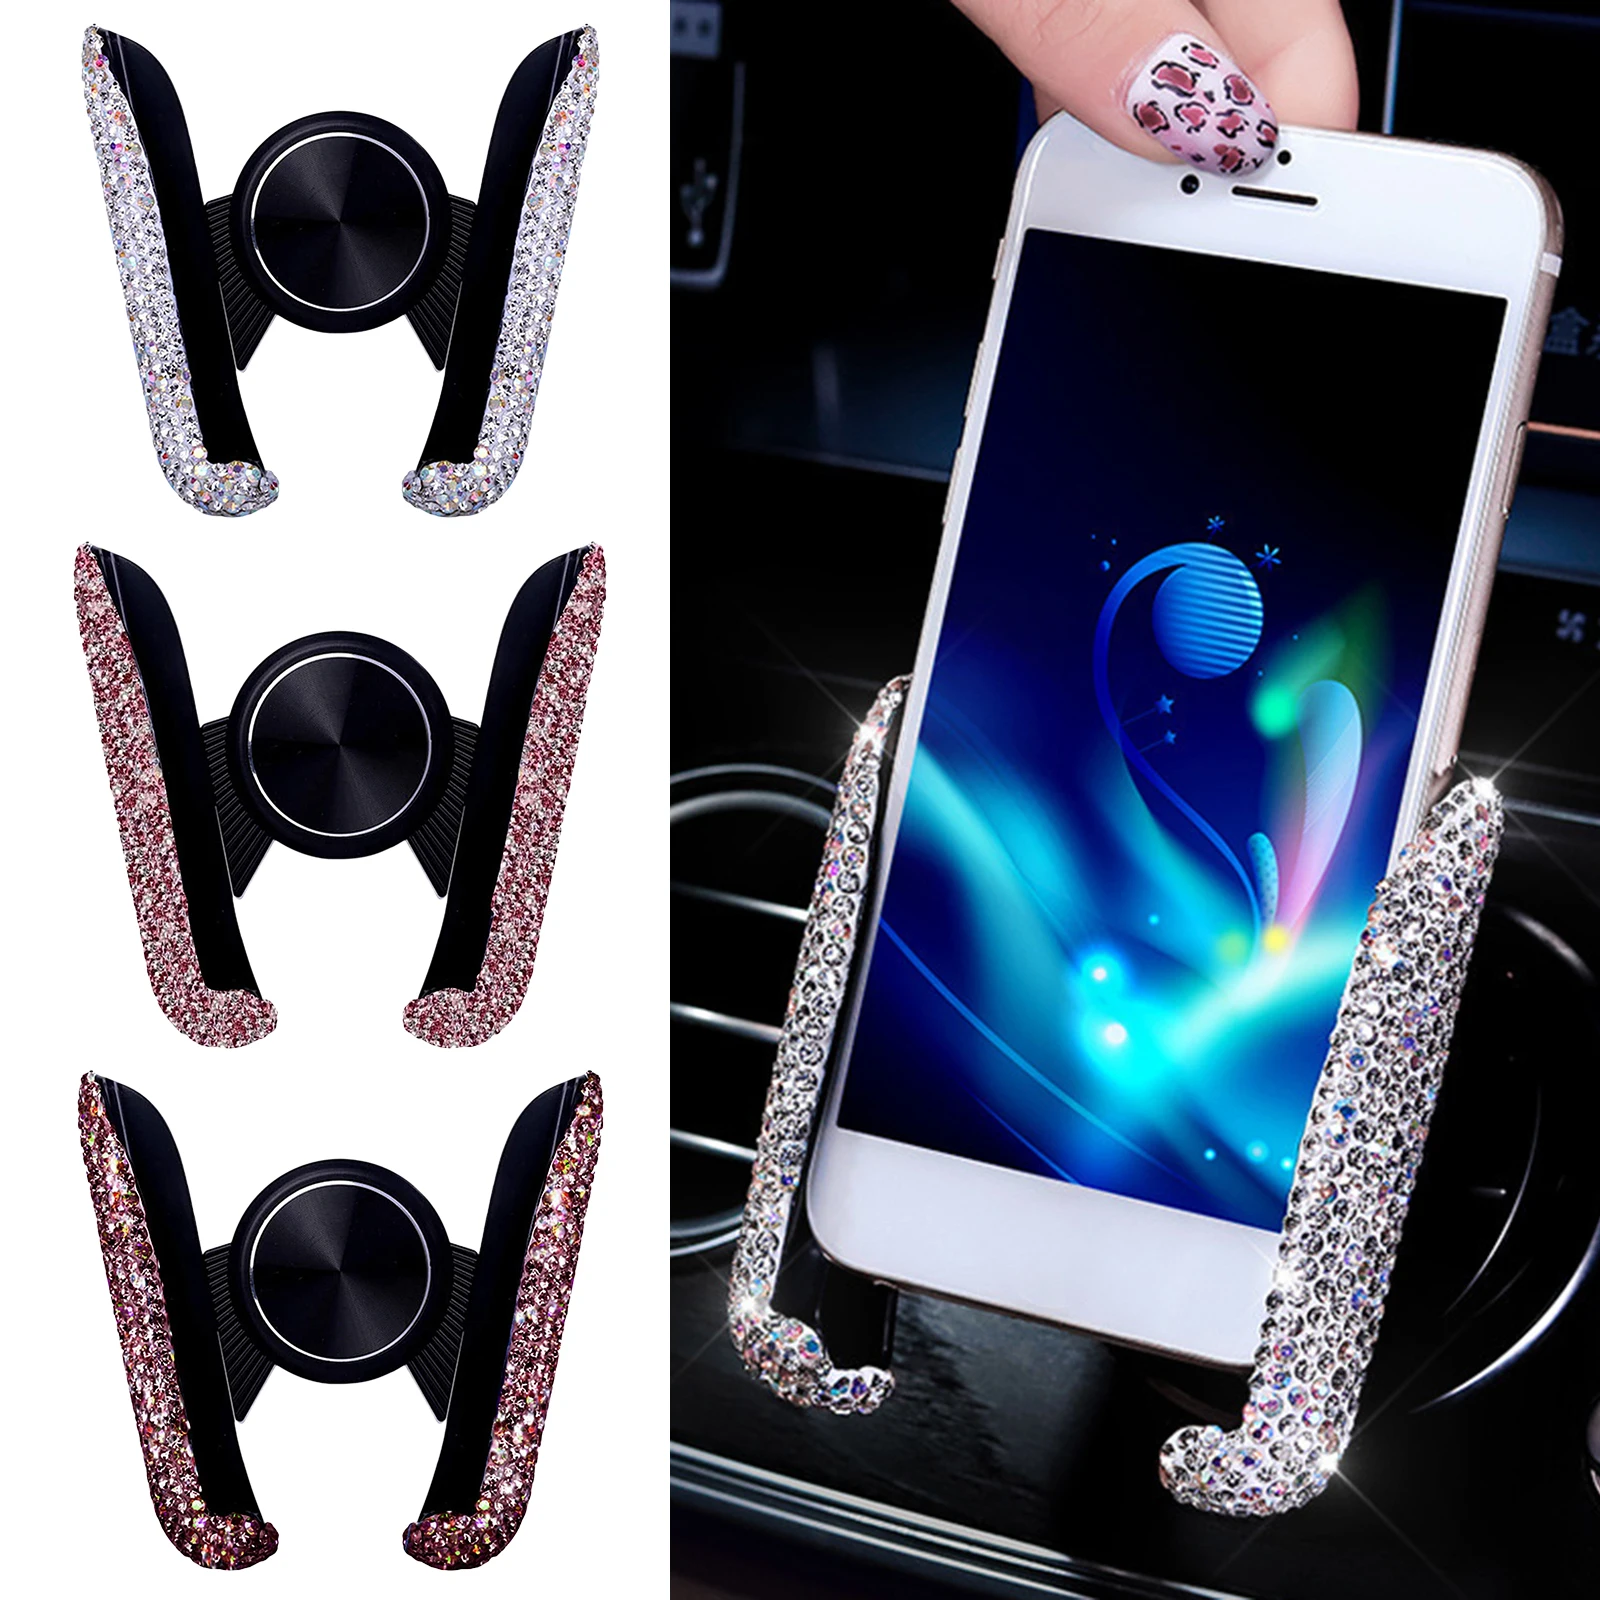 Car Phone Holder Women Diamond Crystal Car Air Vent Mount Clip Mobile Phone Holder Stand in Car Bracket Interior Accessories